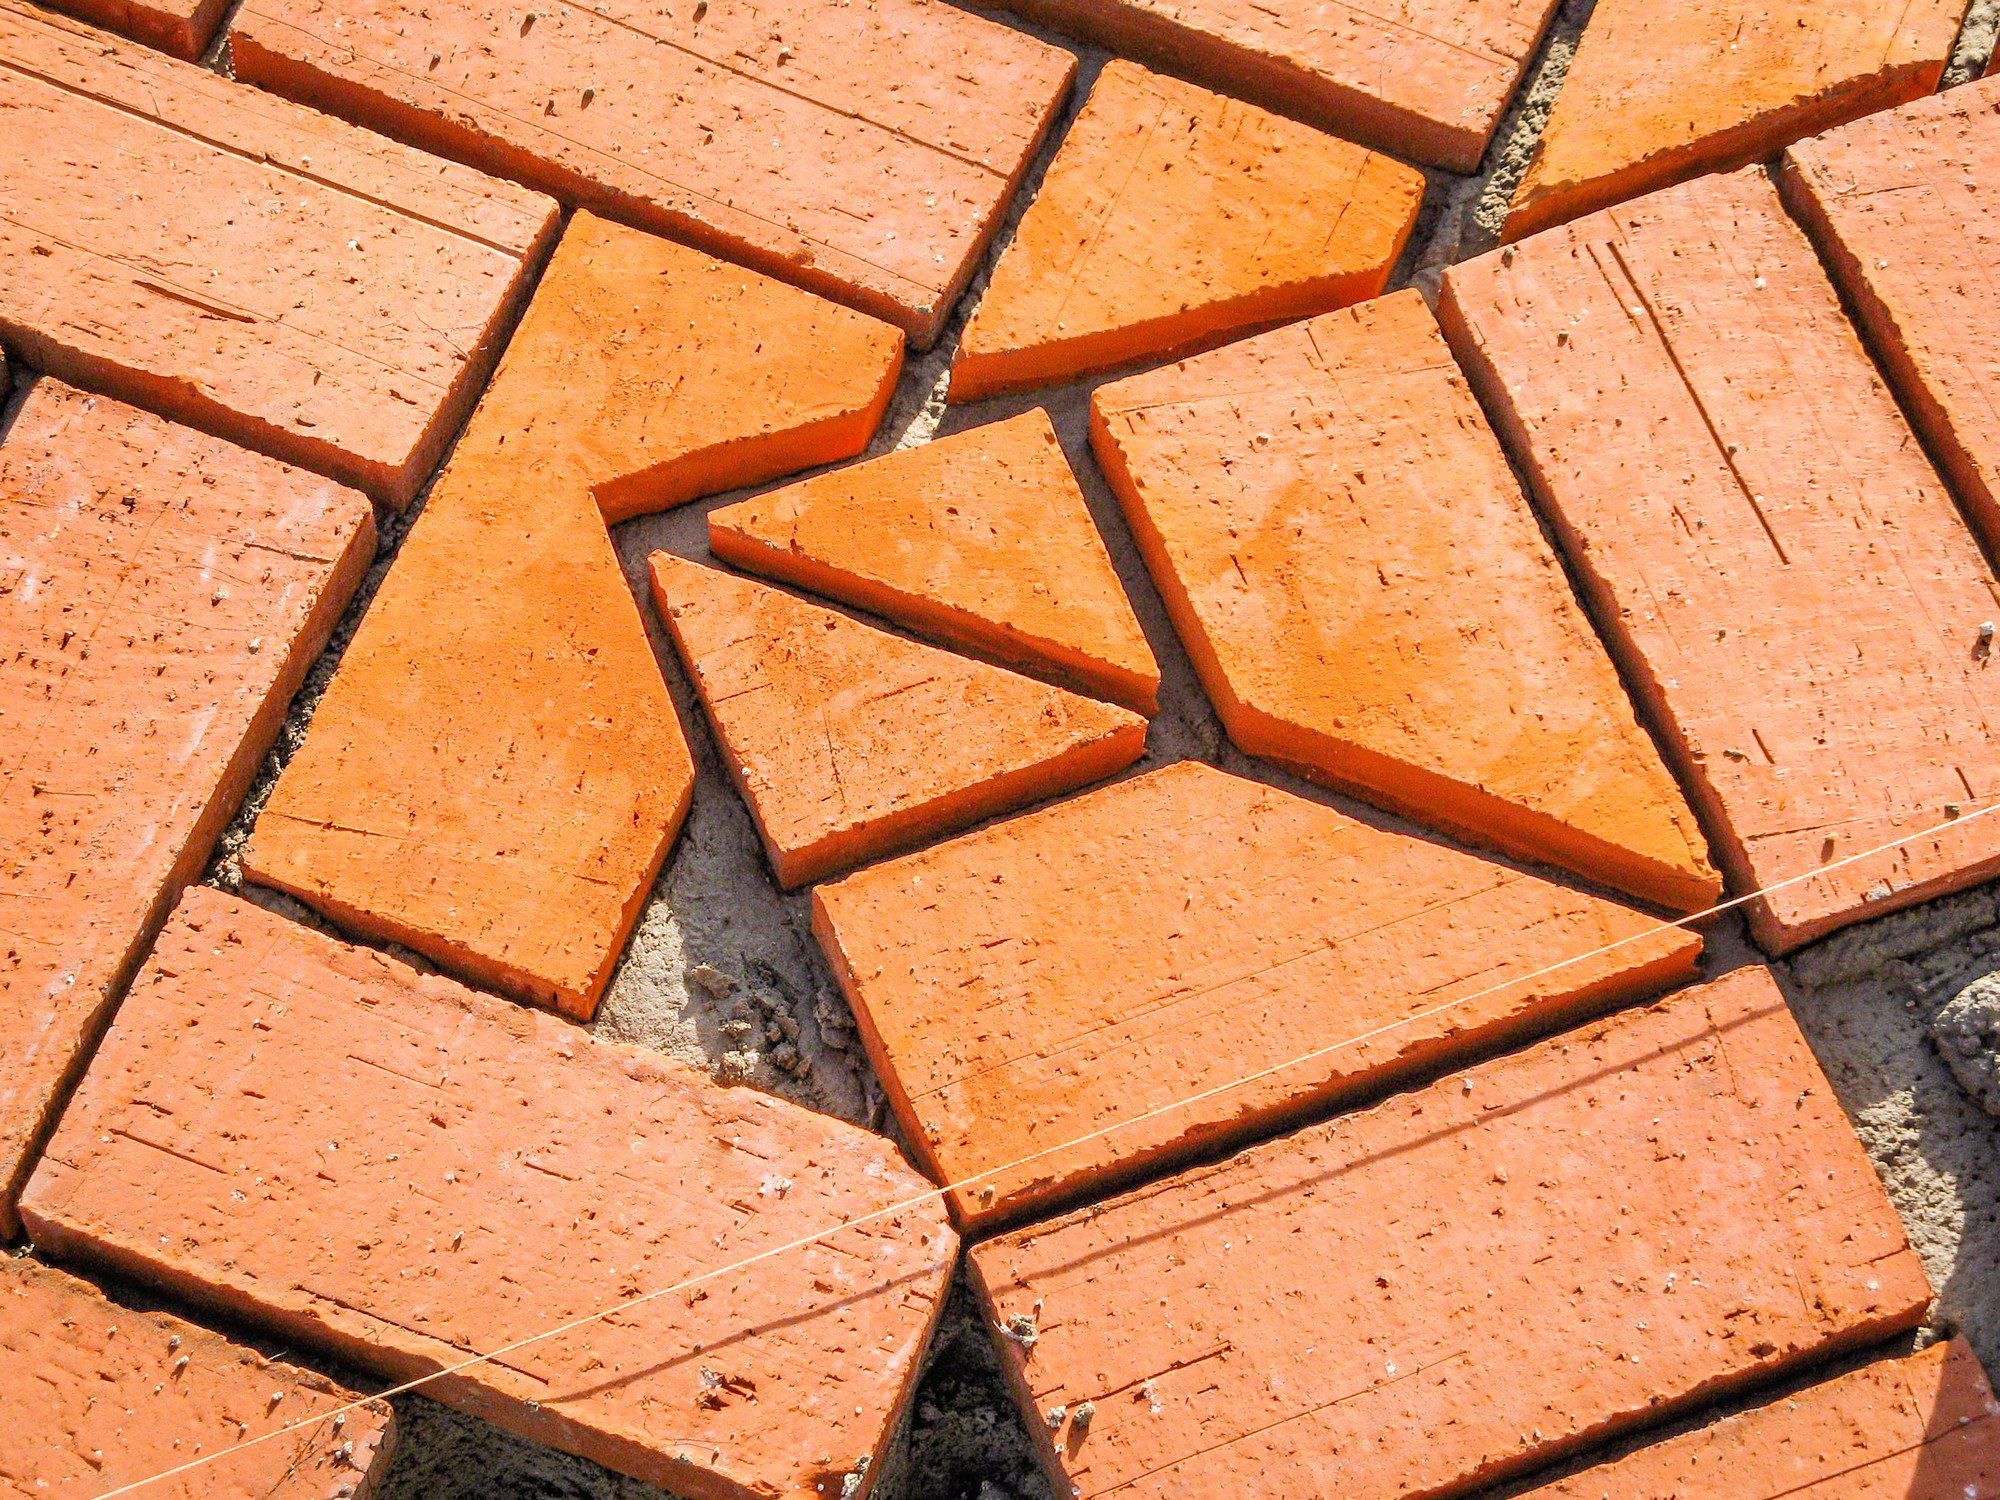 The image shows a collection of reddish-orange paving bricks laid out irregularly. It appears that the bricks are not yet fully set in place, as there are gaps and uneven lines between them, and some bricks are angled or overlapping others in a way that suggests they are in the process of being laid down in a pattern or being adjusted. The ground underneath the bricks looks like compacted earth or sand, which is a typical base layer for paving. The strings visible in the photo are likely used as guides to help ensure the bricks are aligned properly during the installation process.